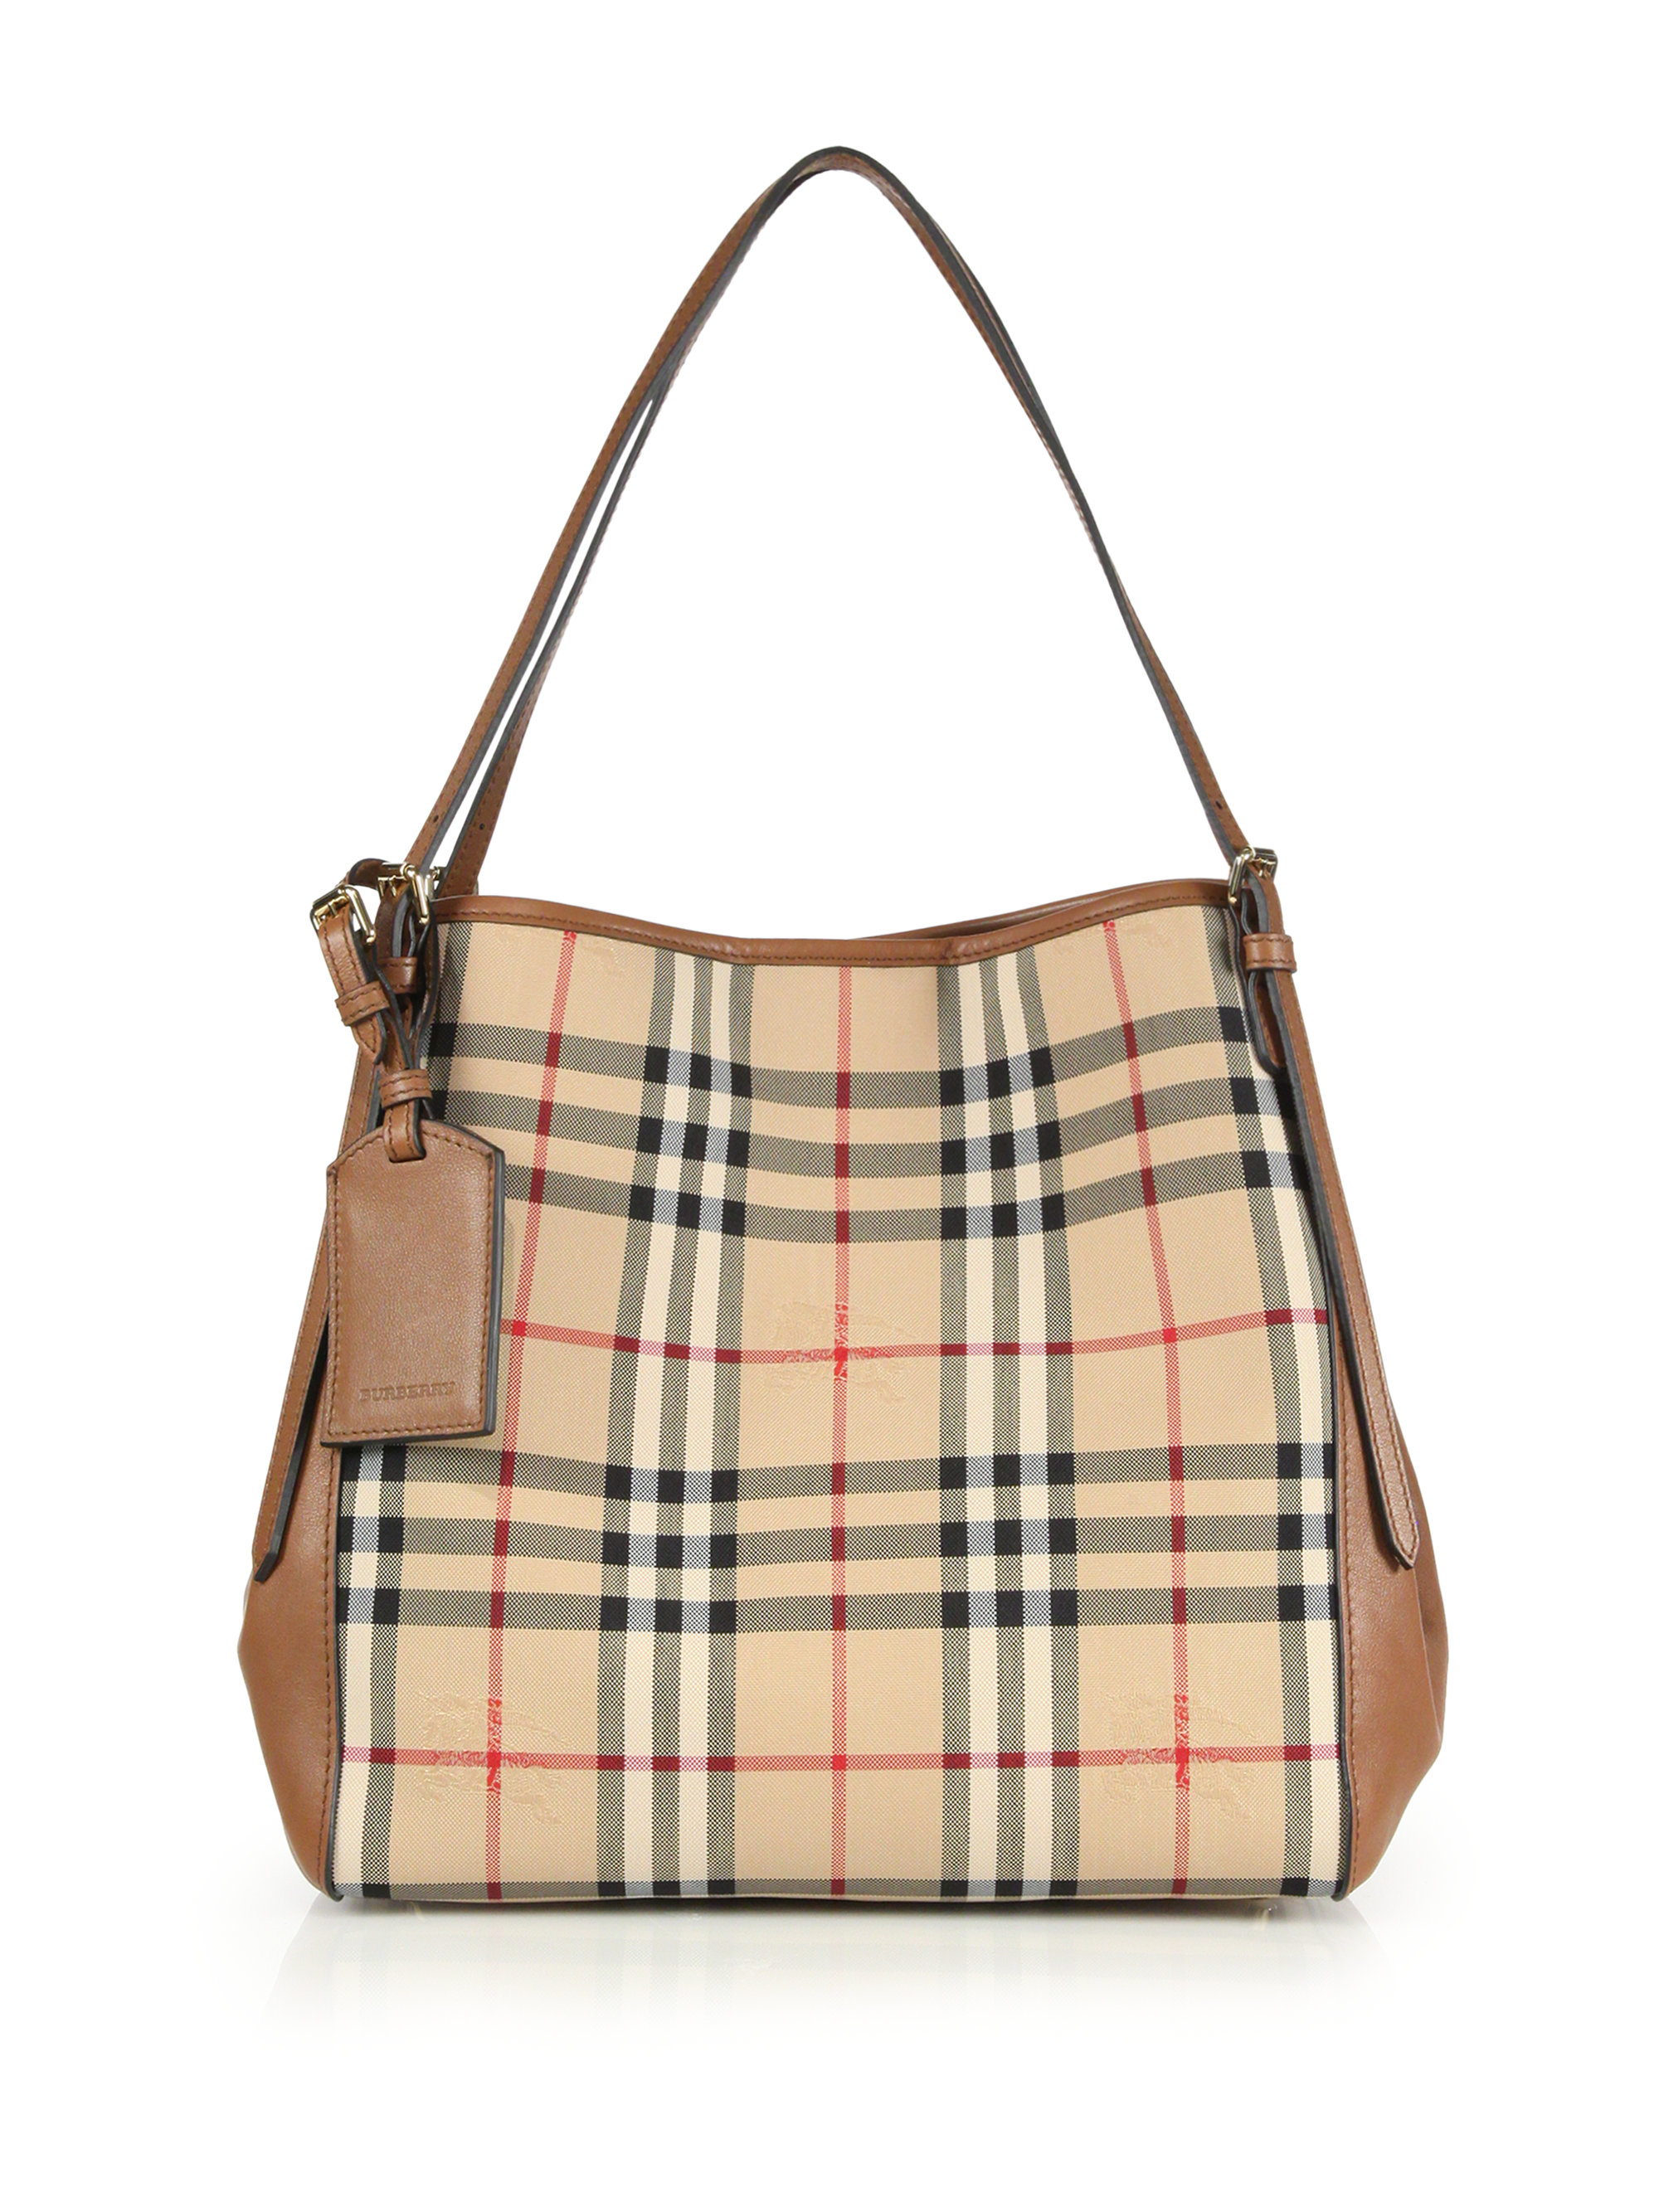 Lyst - Burberry Canter Small Horseferry Check & Leather Tote in Brown